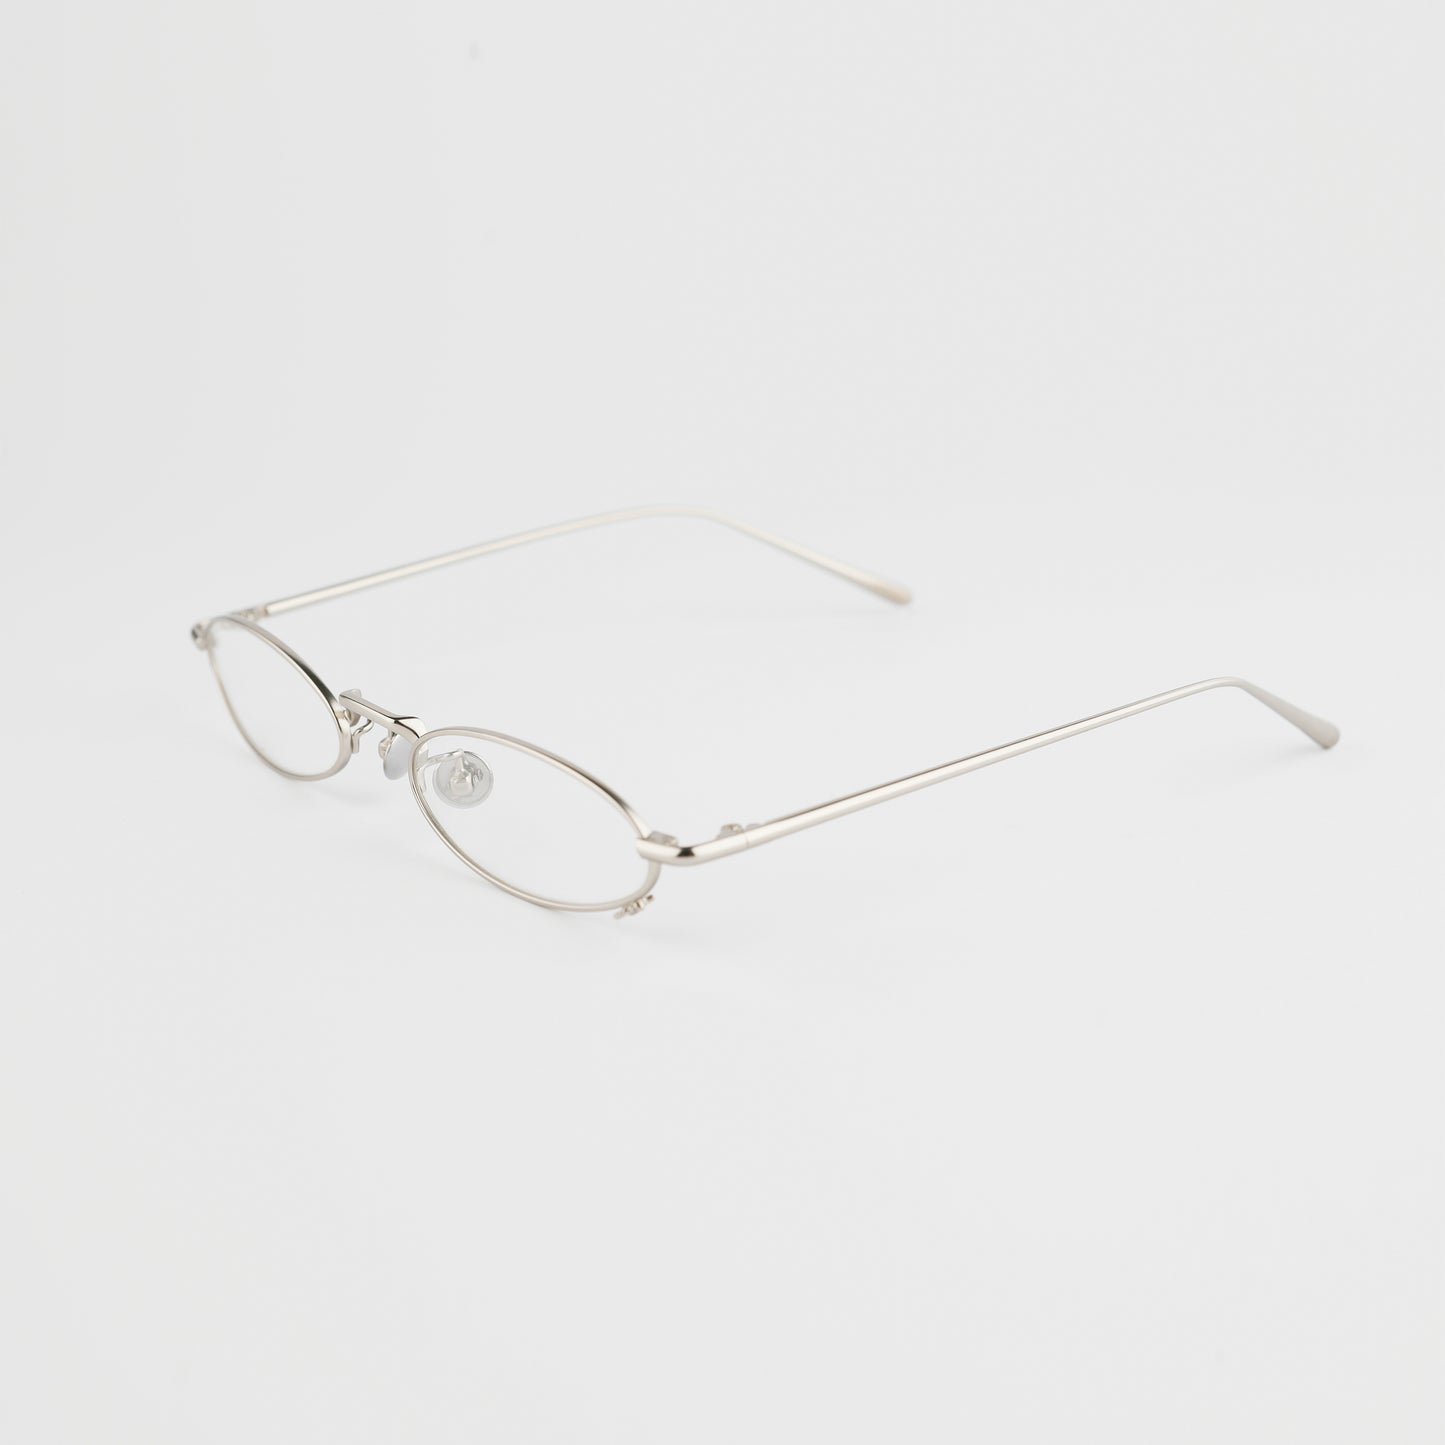 optical oval frames in silver colour stainless steel 